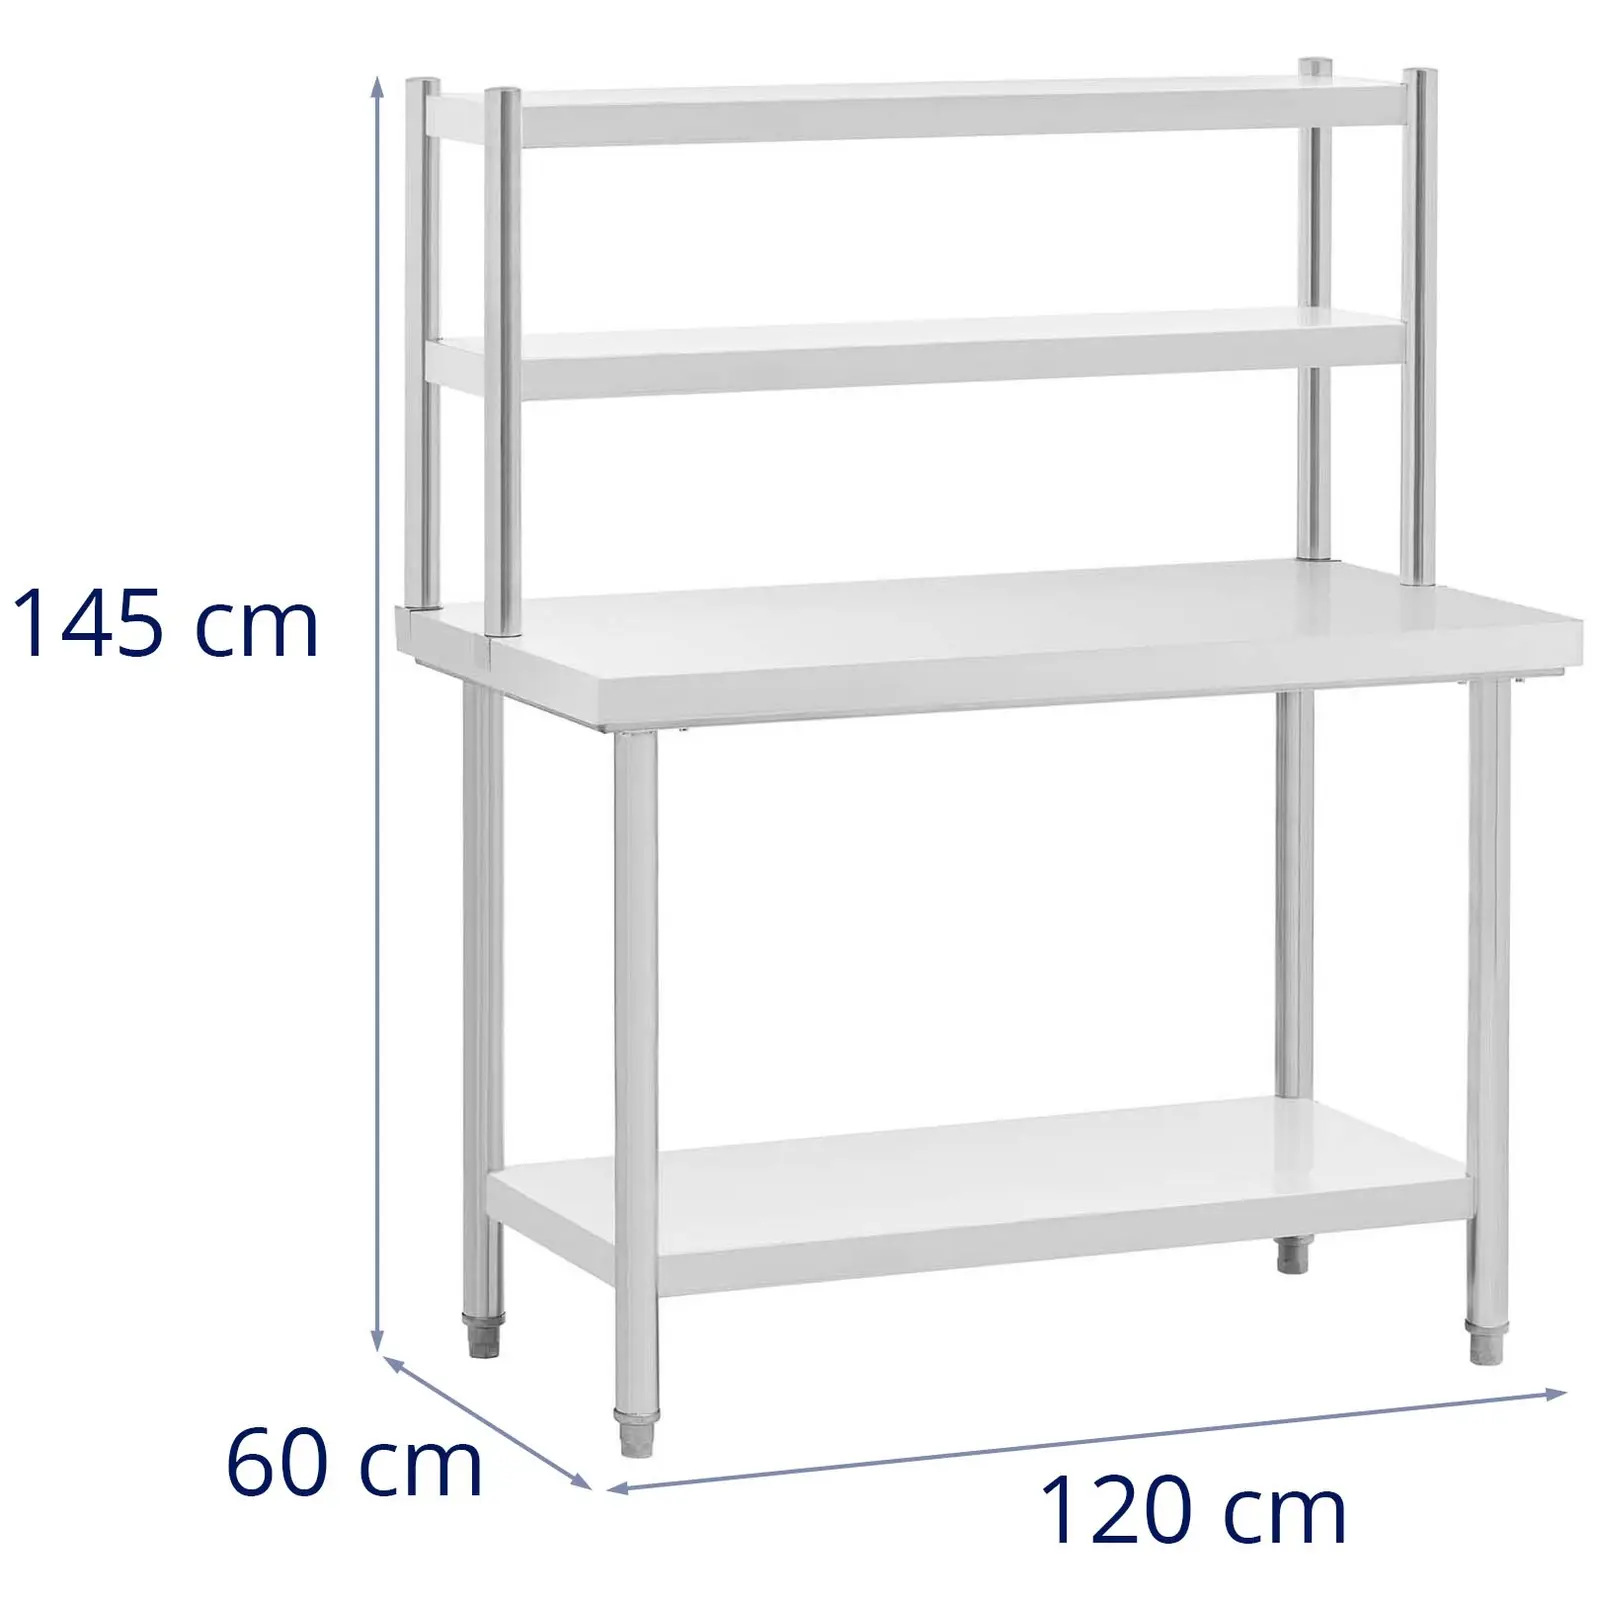 Stainless steel table with shelves - 120 x 60 cm - 300 kg - Royal Catering